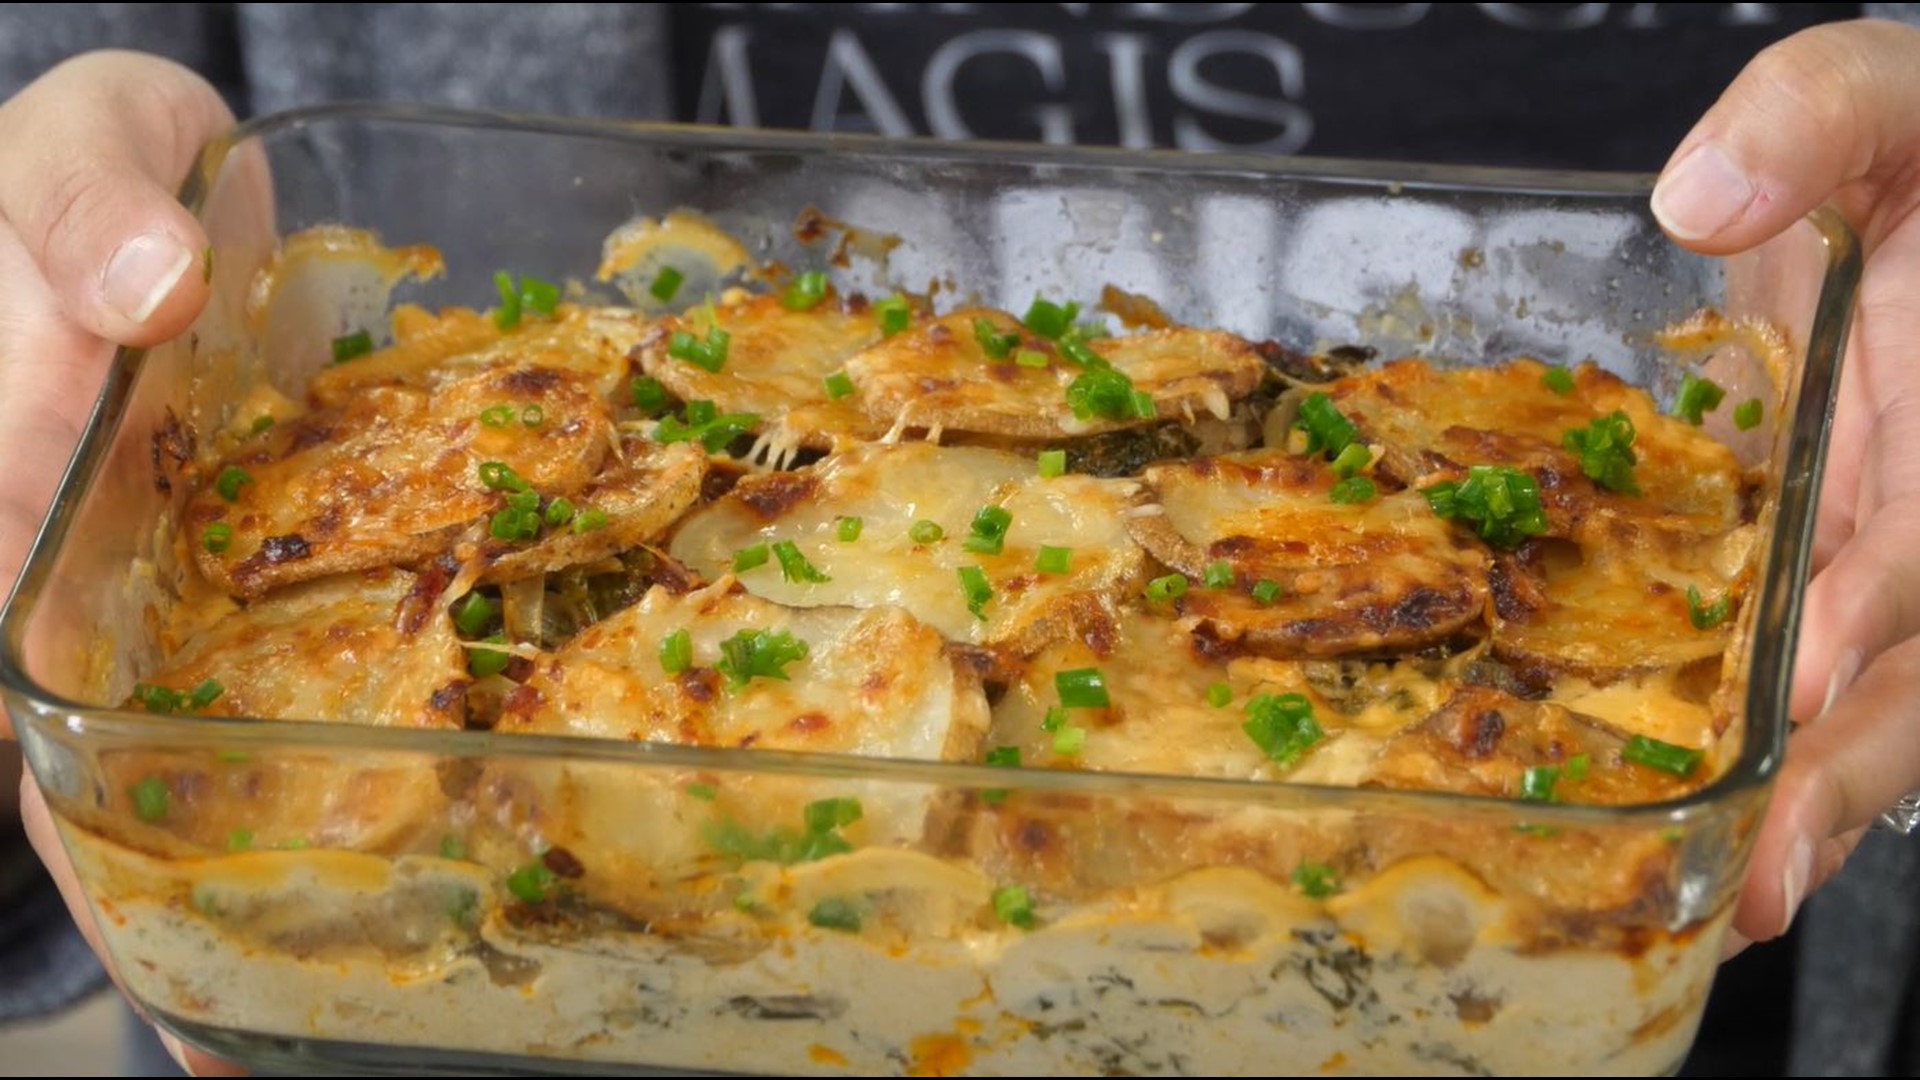 Jan. 29, 2021: Everyone loves potatoes, right? Cleveland Central Kitchen is cooking up a harissa-spiced potato gratin to warm you up for 'Comfort Food Friday.'